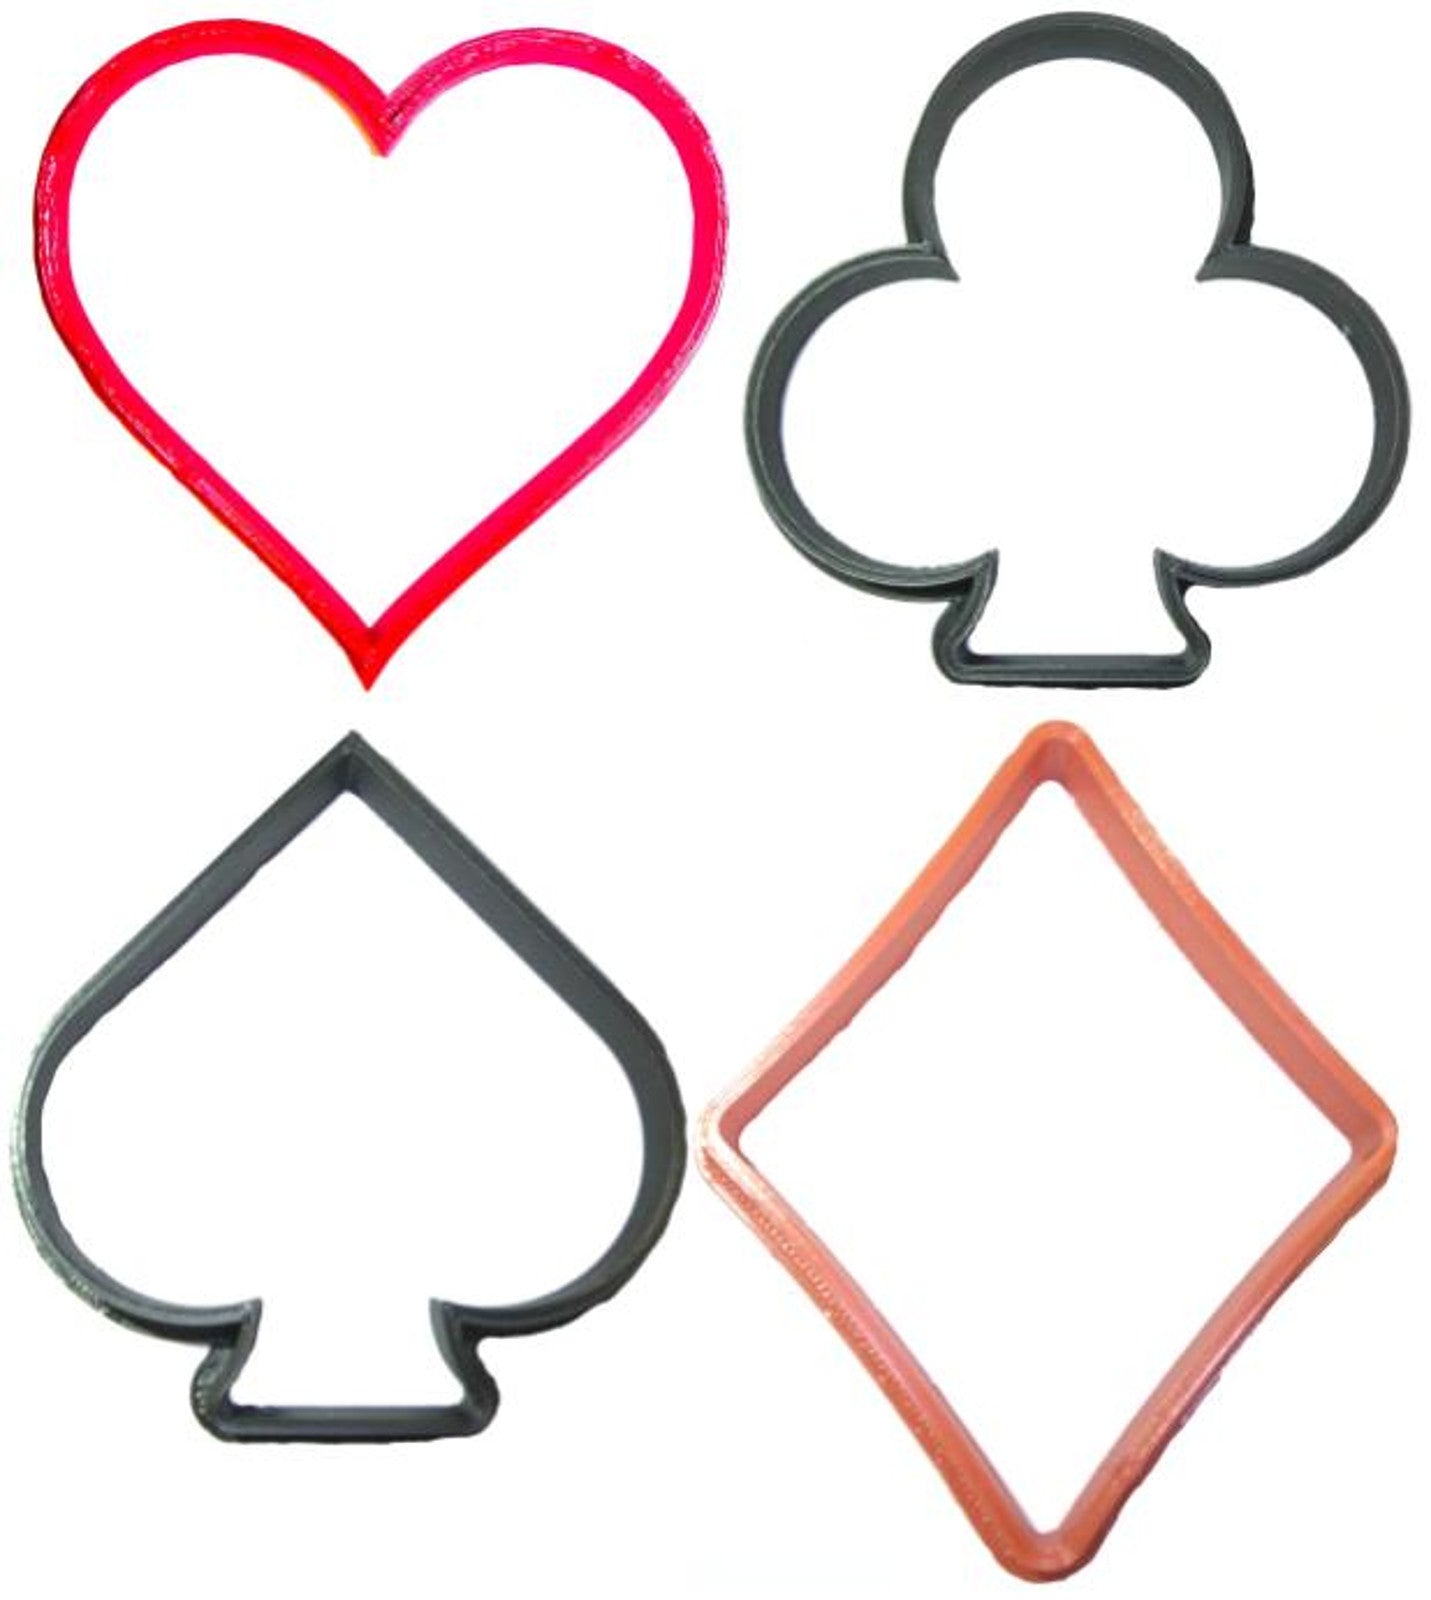 French Suits Cards Card Deck Game Poker Set Of 4 Cookie Cutters USA PR1174